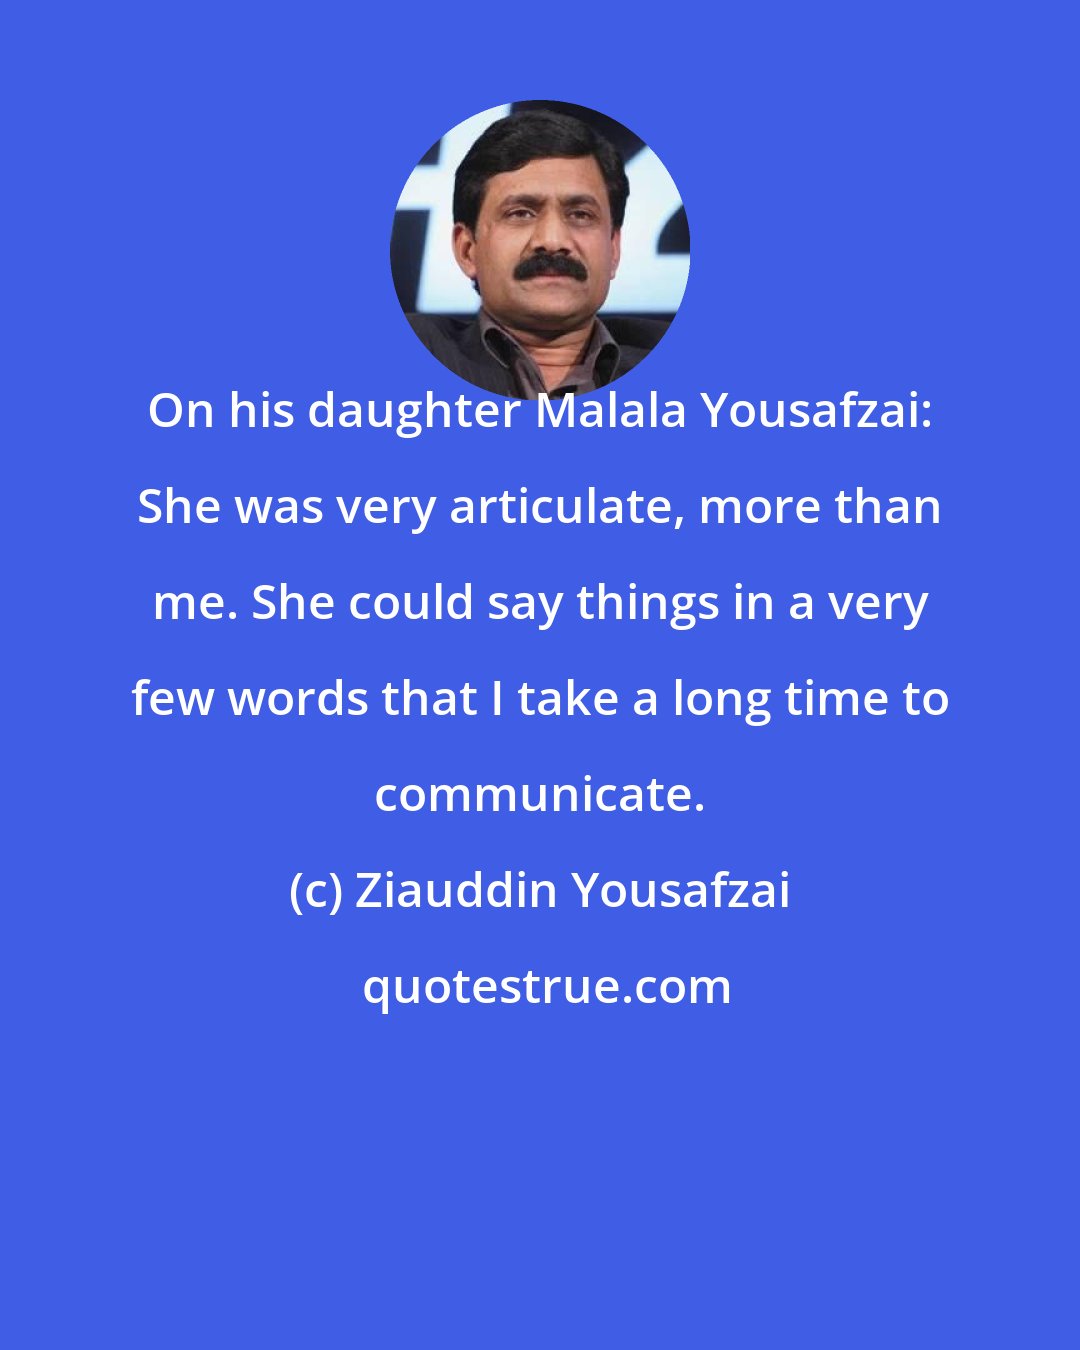 Ziauddin Yousafzai: On his daughter Malala Yousafzai: She was very articulate, more than me. She could say things in a very few words that I take a long time to communicate.